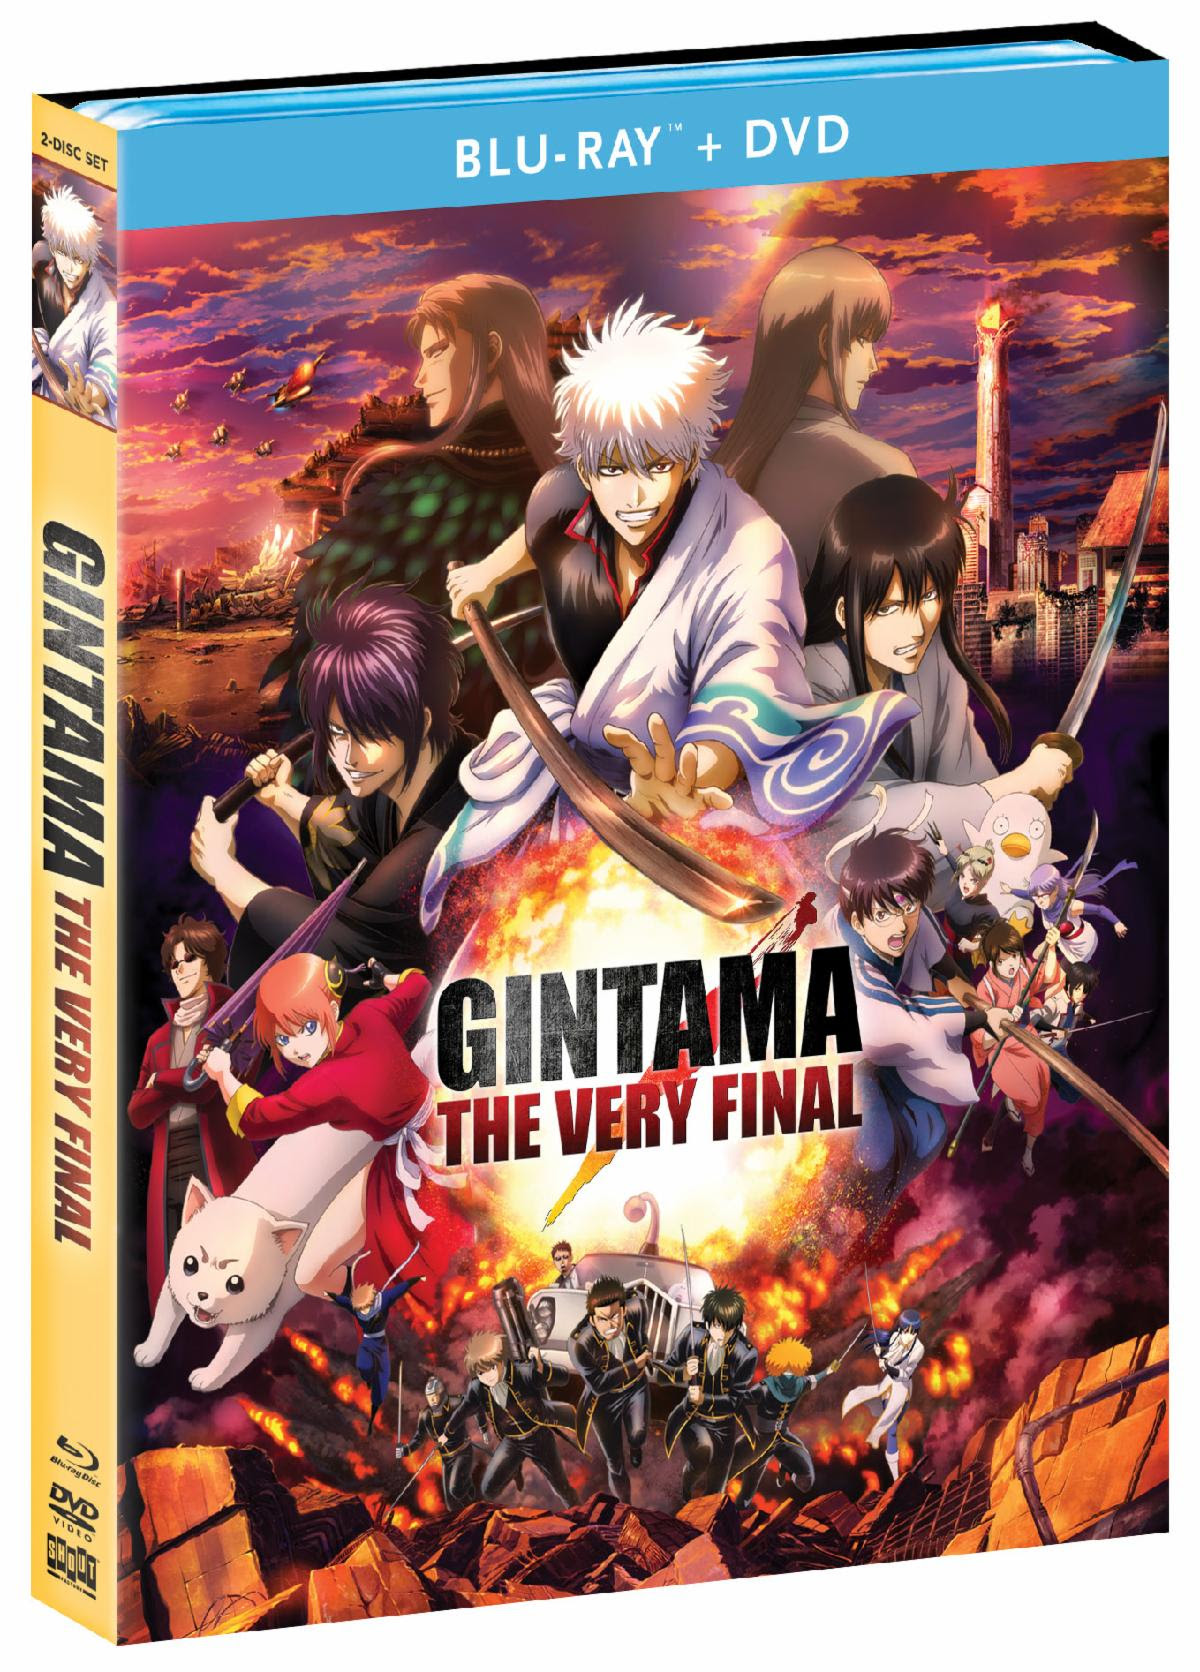 Crunchyroll - Shout! Factory Details Gintama THE VERY FINAL Home Video  Release